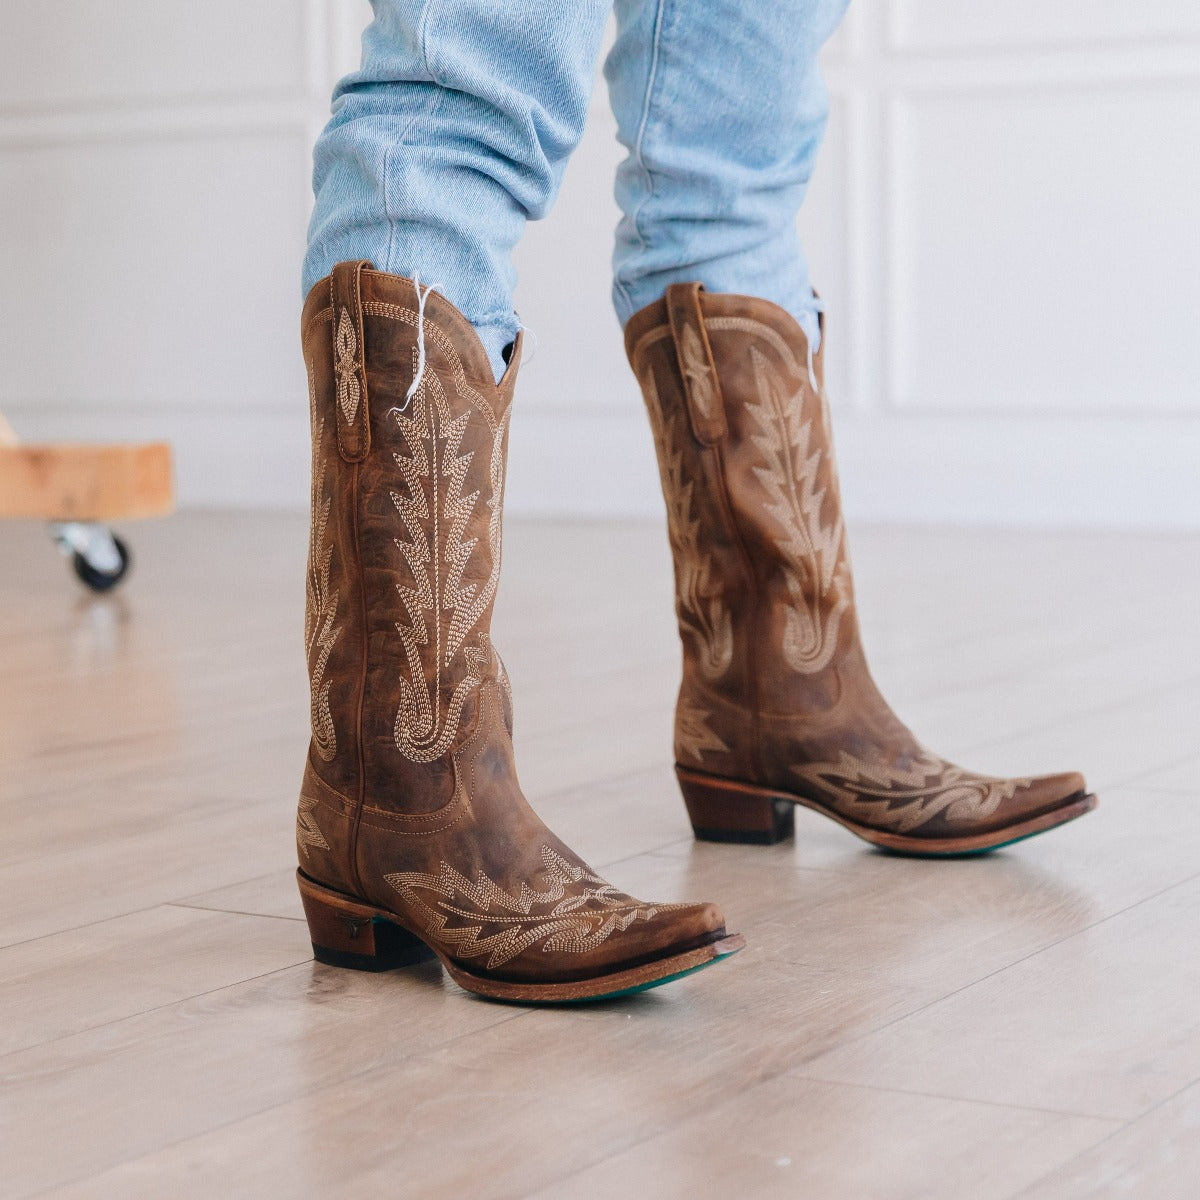 Women's Boots | Knee High | Ankle | Fringe | Roper | Cowgirl | Leather